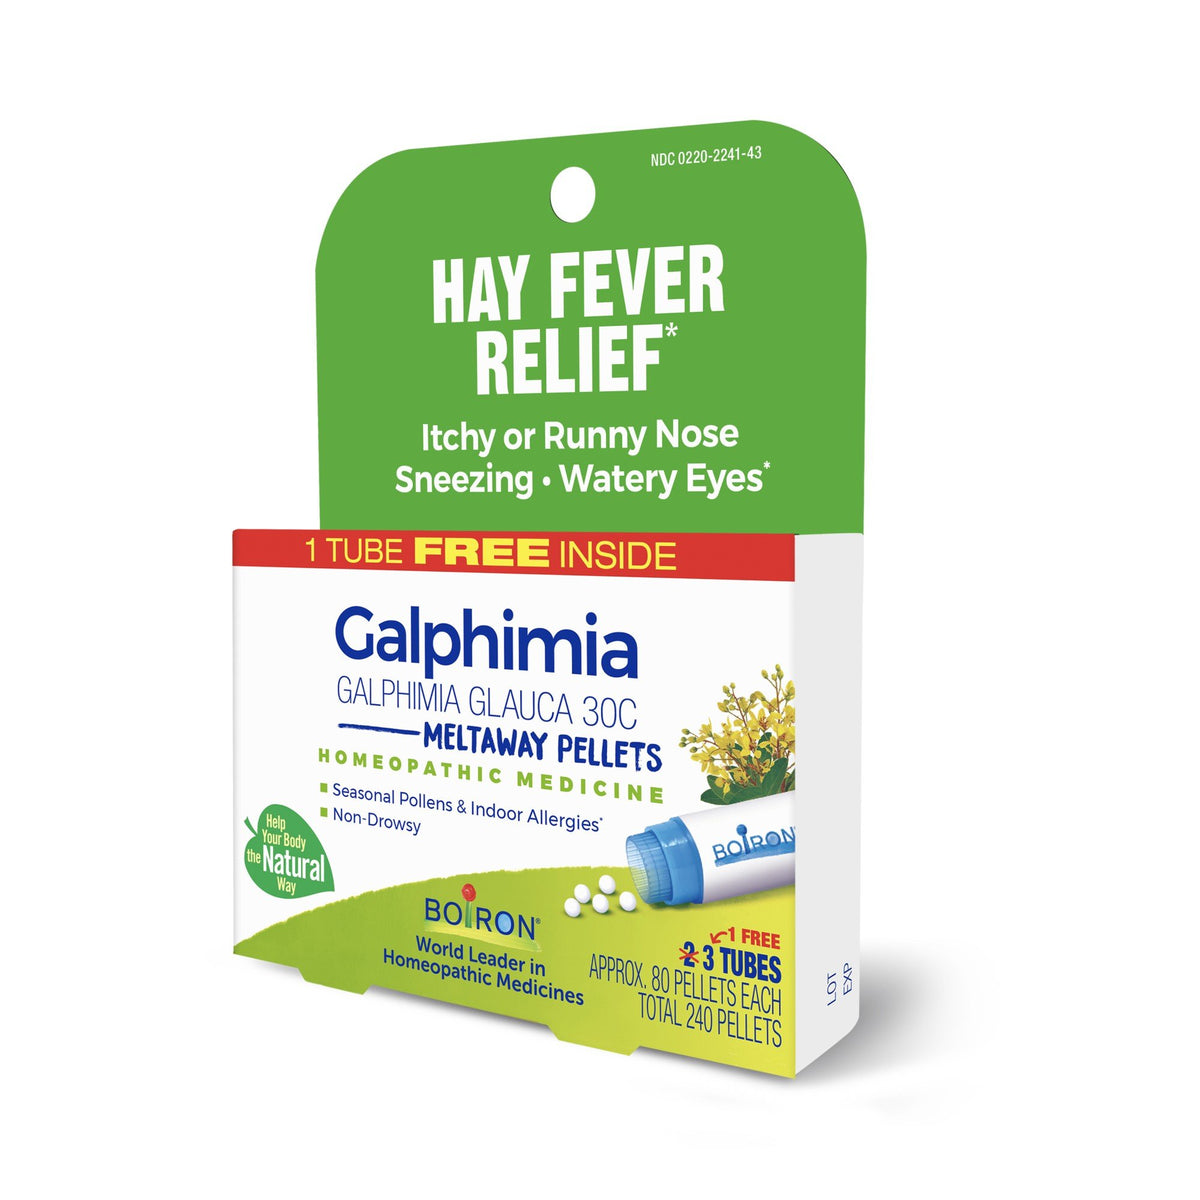 Boiron Galphimia Glauca 30C 3 MDT Homeopathic Medicine For Hay Fever Relief 3 Tubes Box